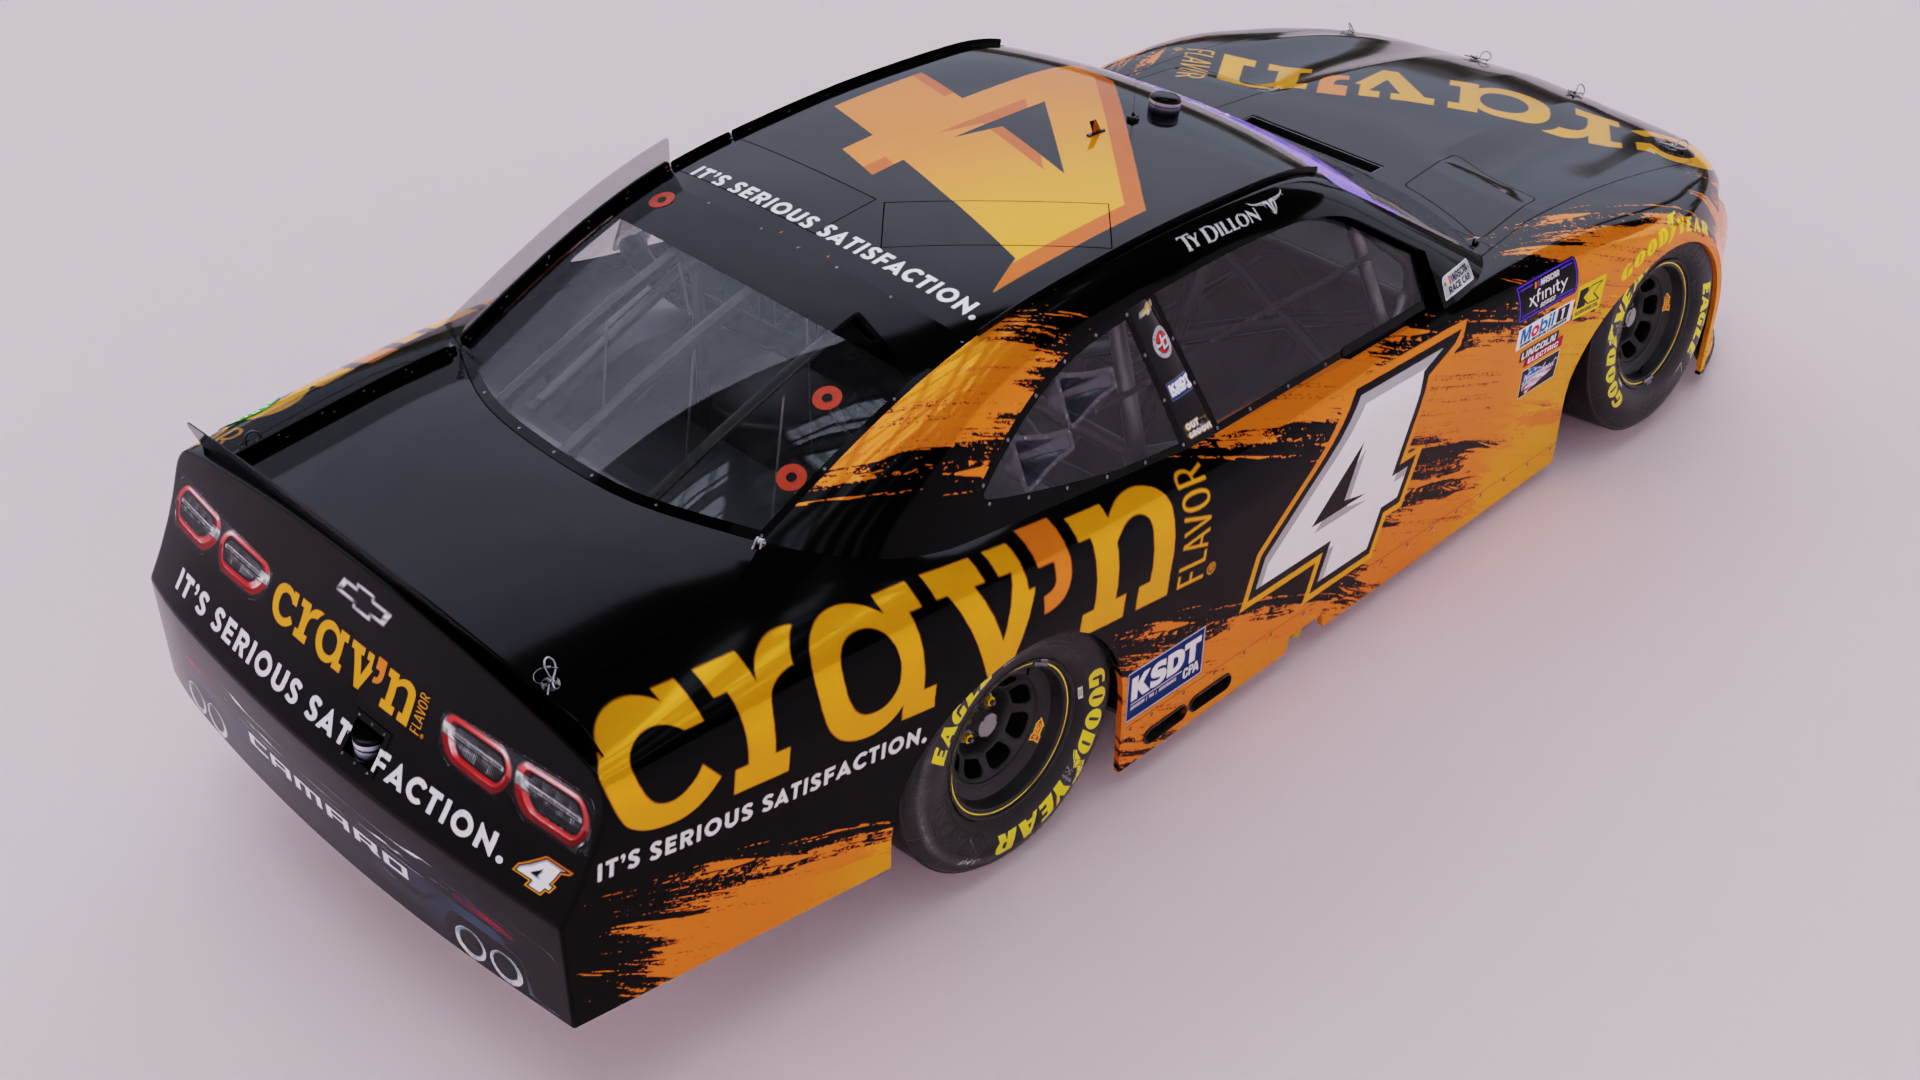 Crav'n Flavor brand to partner with JD Motorsports and driver Ty Dillon for Chicago